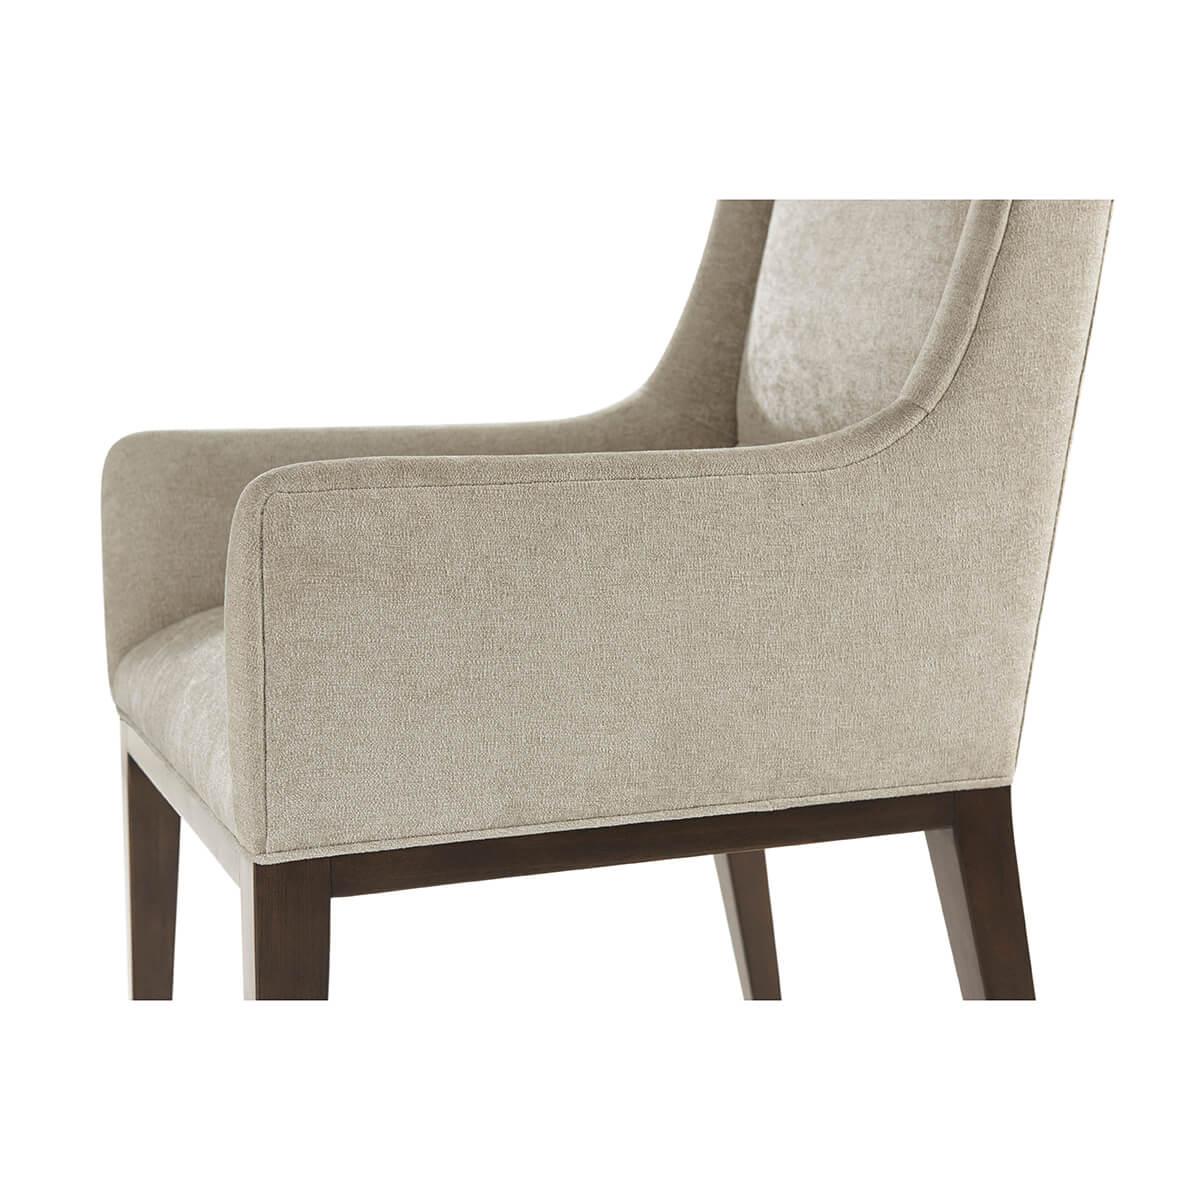 Vietnamese Midcentury Upholstered Dining Arm Chair For Sale